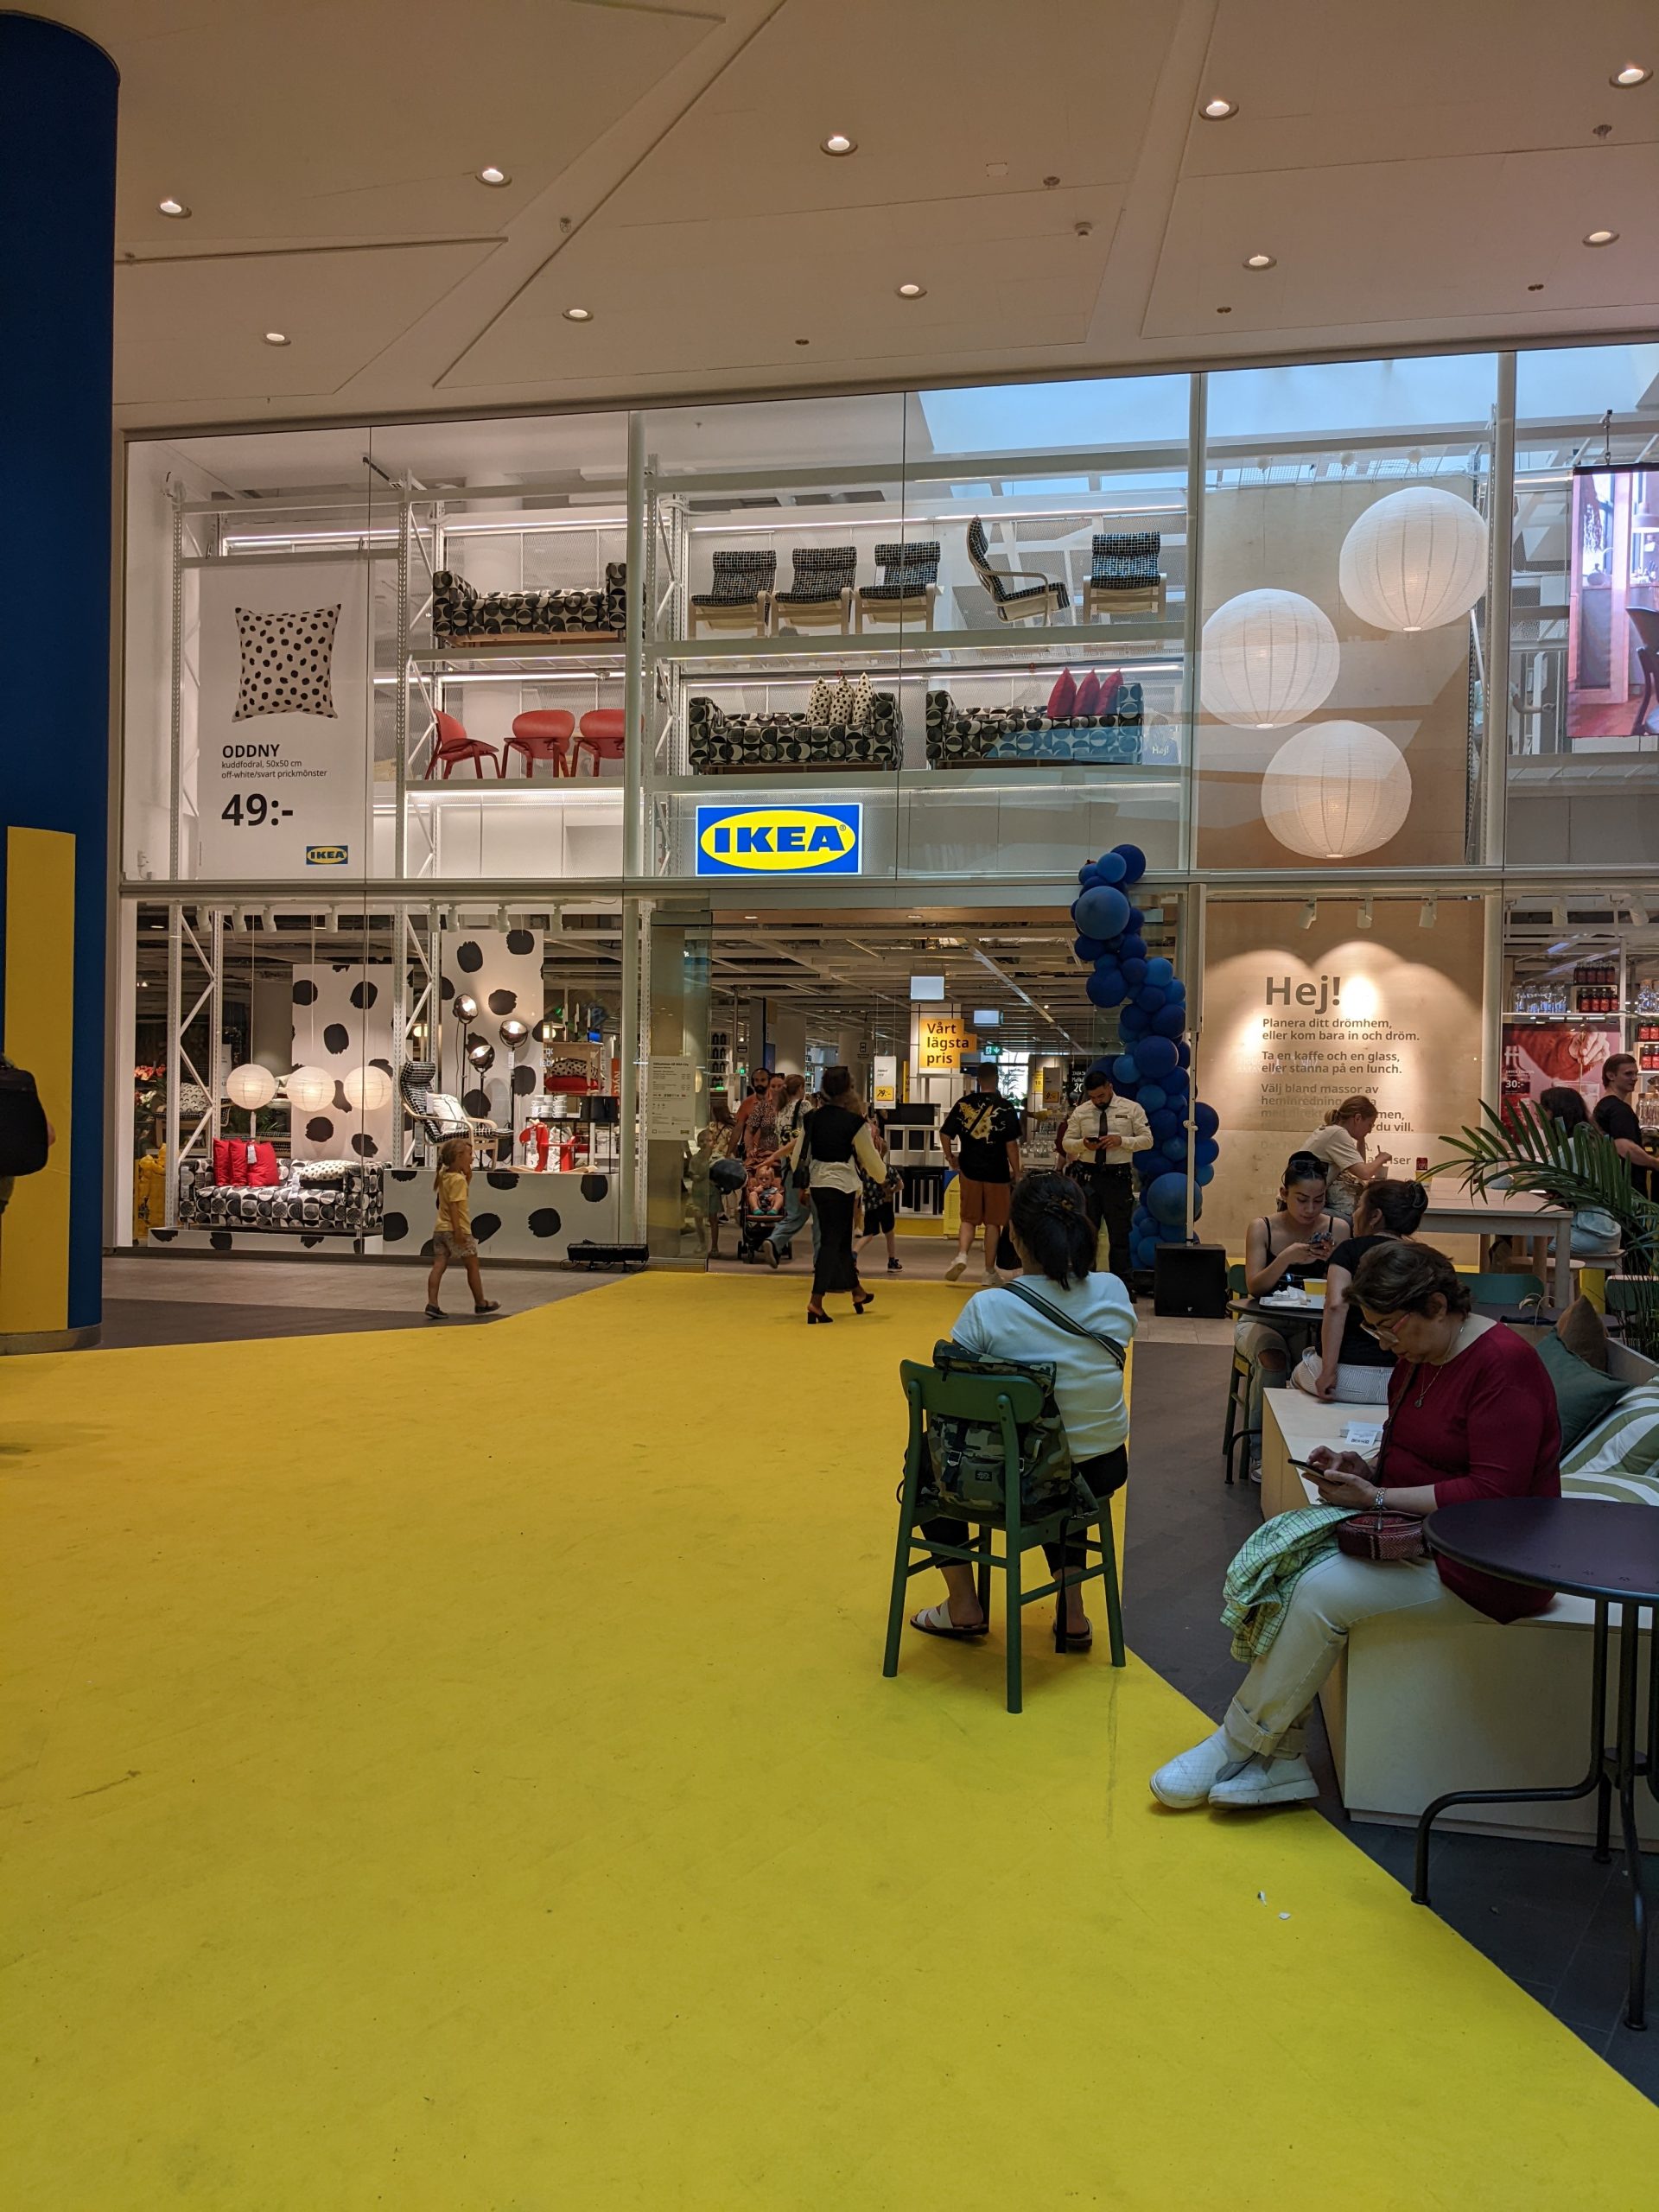 The entrance to Ikea with a yellow carpet leading to it